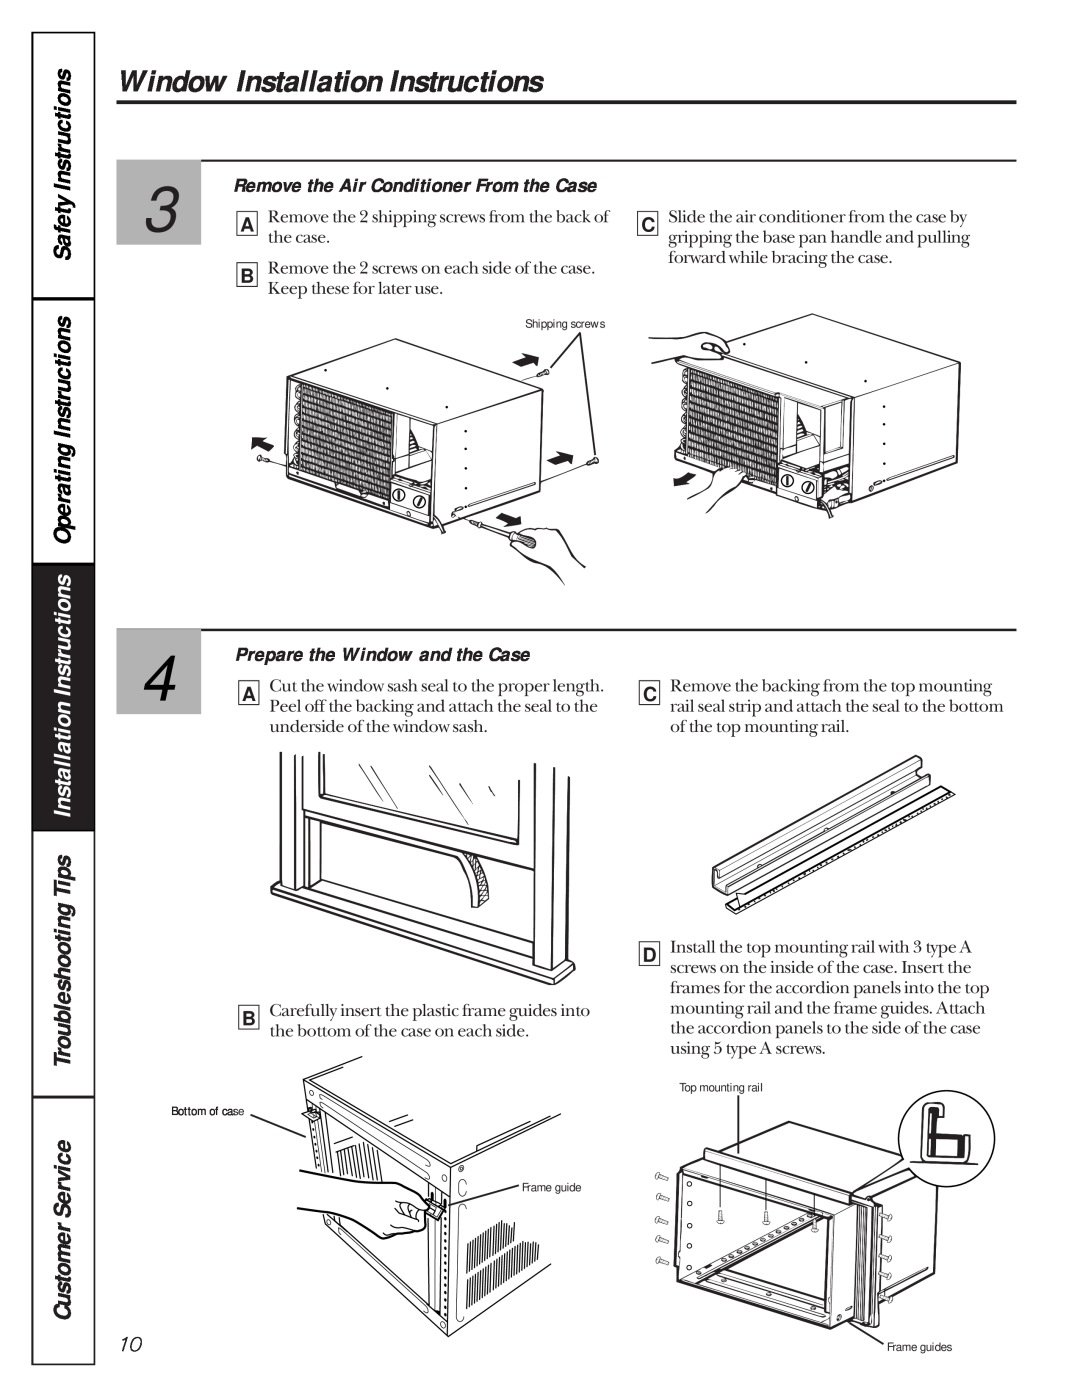 GE agv18 TroubleshootingTips, Remove the Air Conditioner From the Case, Window Installation Instructions, CustomerService 